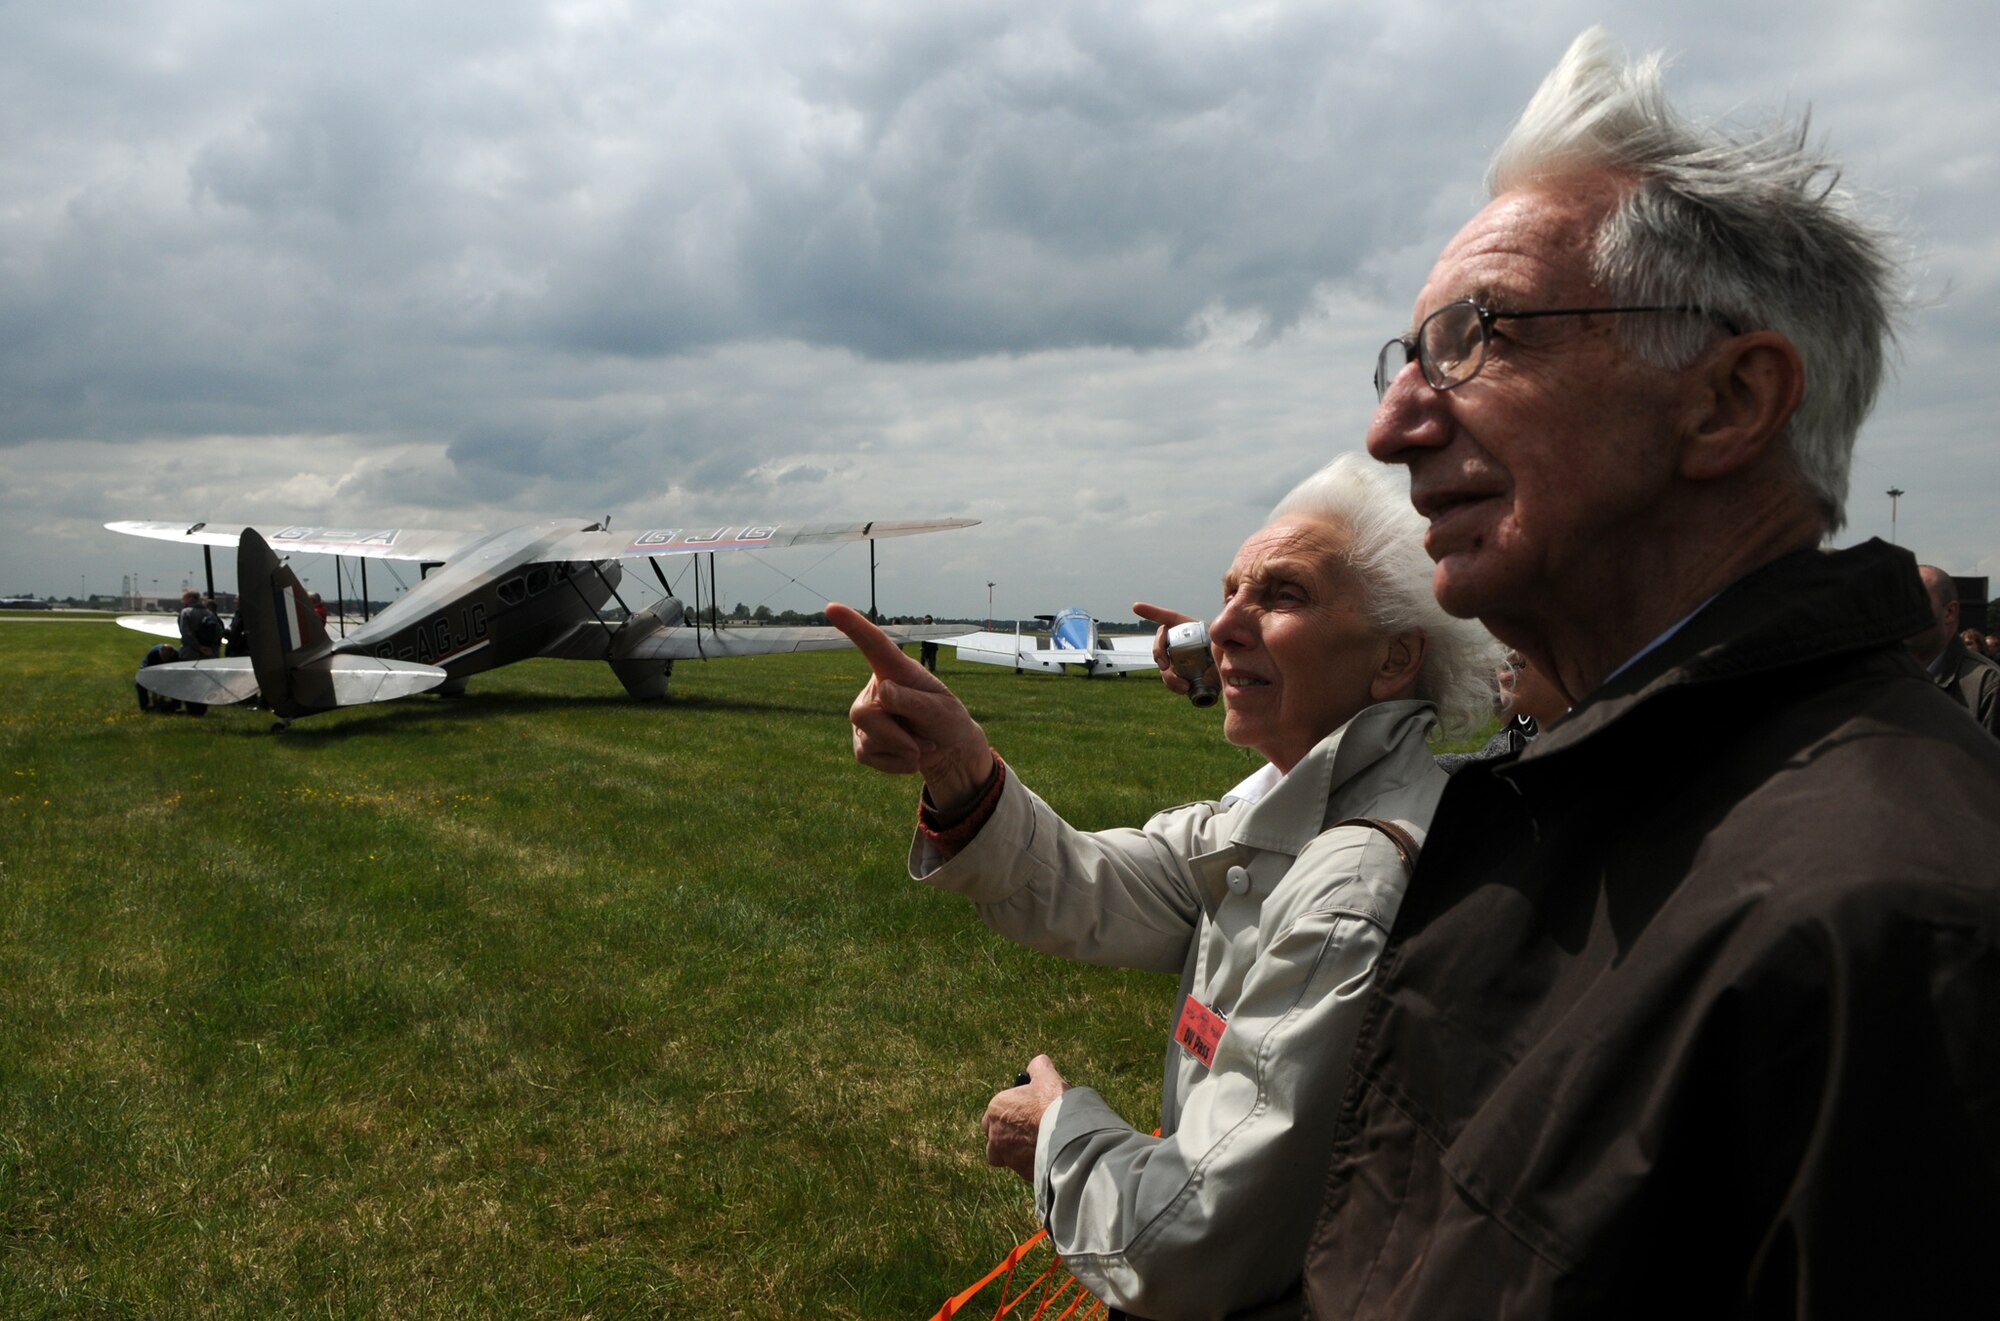 Former Royal Air Force Airman 1st Class Charlie Woolford, now 88, stands at the edge of the RAF Mildenhall flight line with Natalie Ebbs, whose father and grandfather helped build the original hangars here.  Ms. Ebbs points at one of about 20 ’30s-era aircraft which later departed the base in a recreation of the historical 1934 England to Australia Air Race during the base’s 75th Anniversary Celebration May 15.  (U.S. Air Force photo by Staff Sgt. Austin M. May)